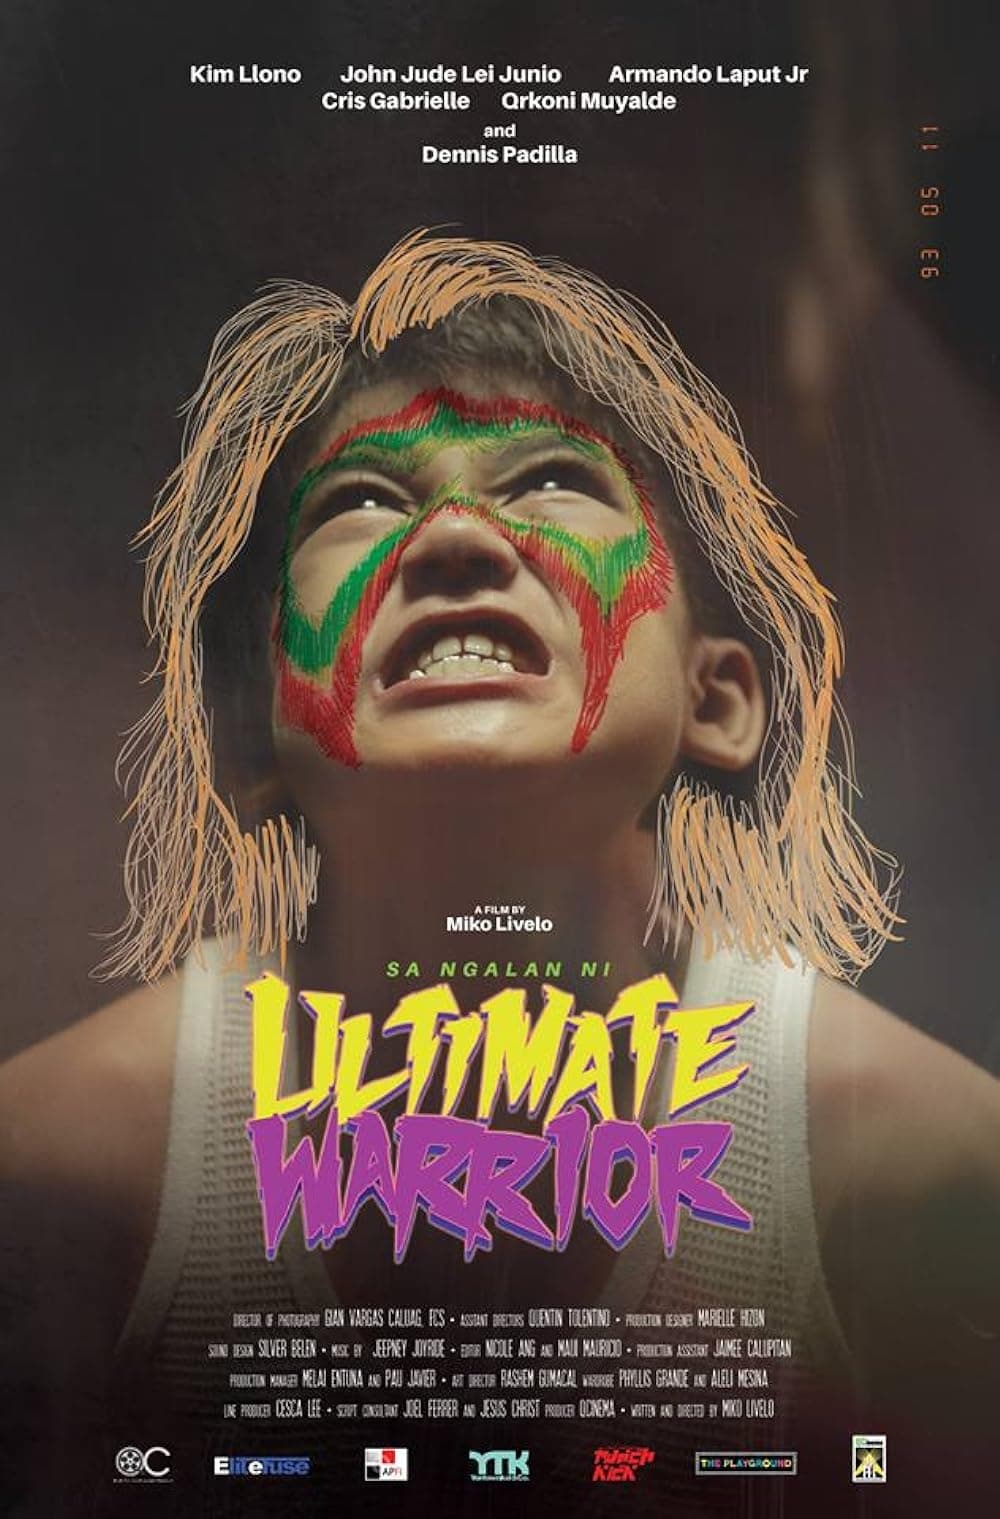 In the Name of Ultimate Warrior